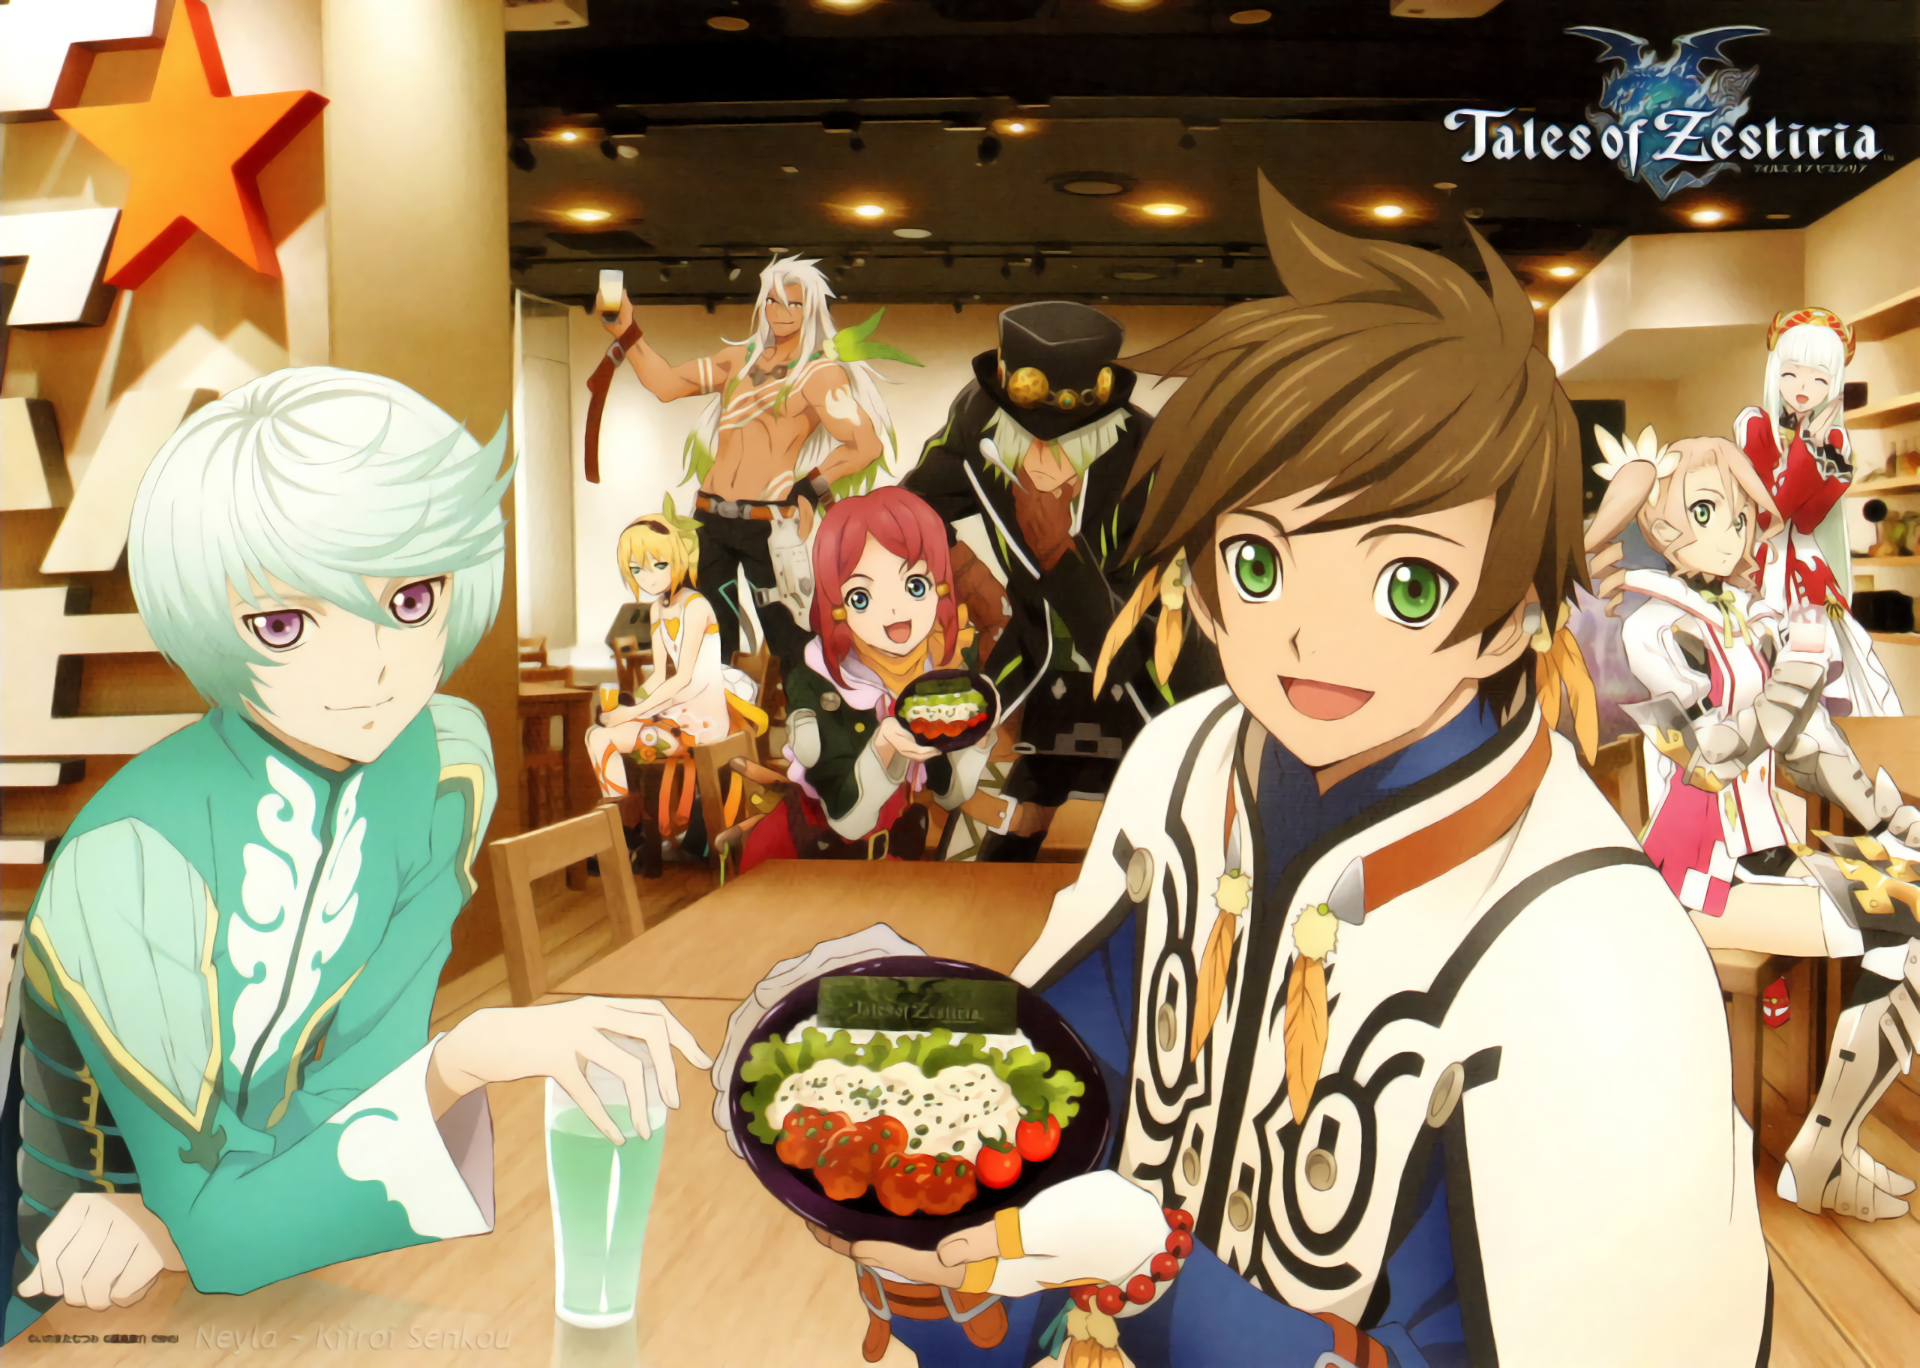 Anime Tales of Zestiria the X HD Wallpaper | Background Image